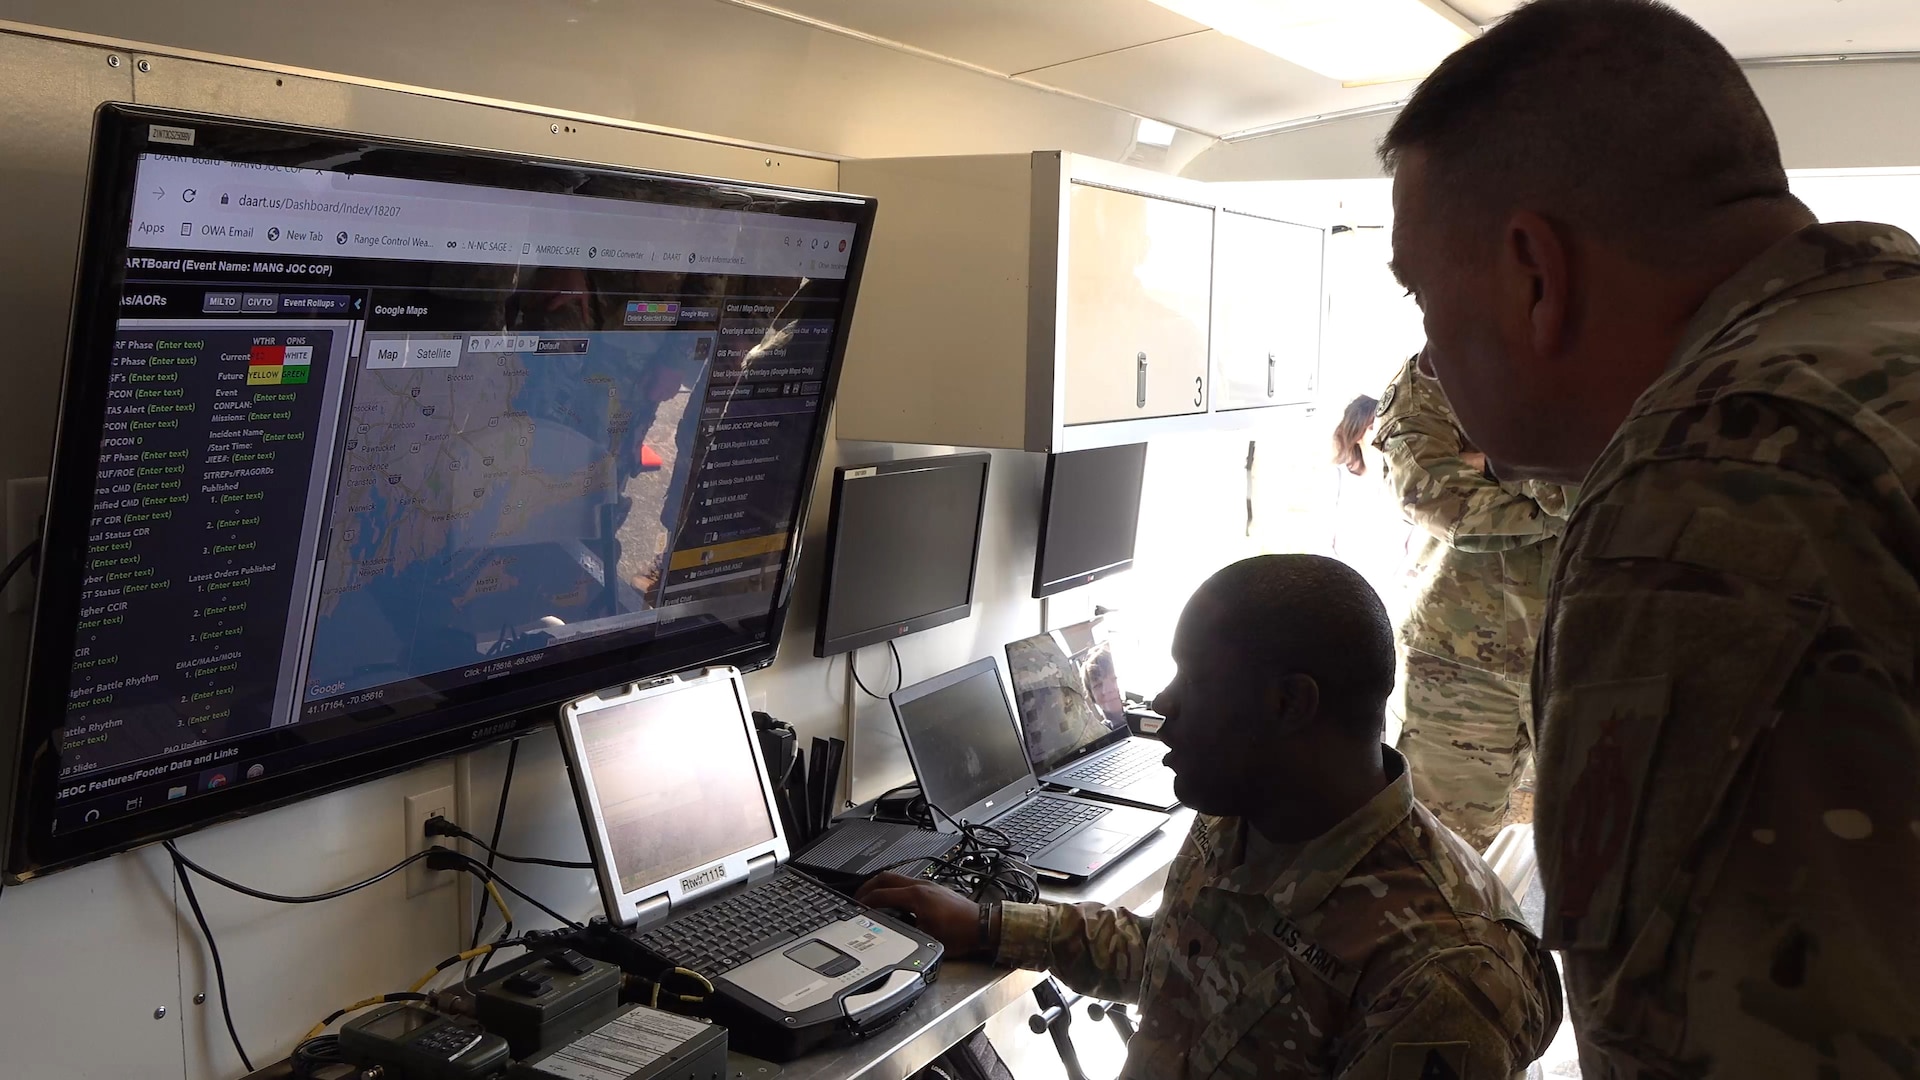 Maj. Gen. Gary W. Keefe, the adjutant general of the Massachusetts National Guard, is briefed on the capabilities of the NG CIMS system, Oct. 6, 2019, at Joint Base Cape Cod, Mass.